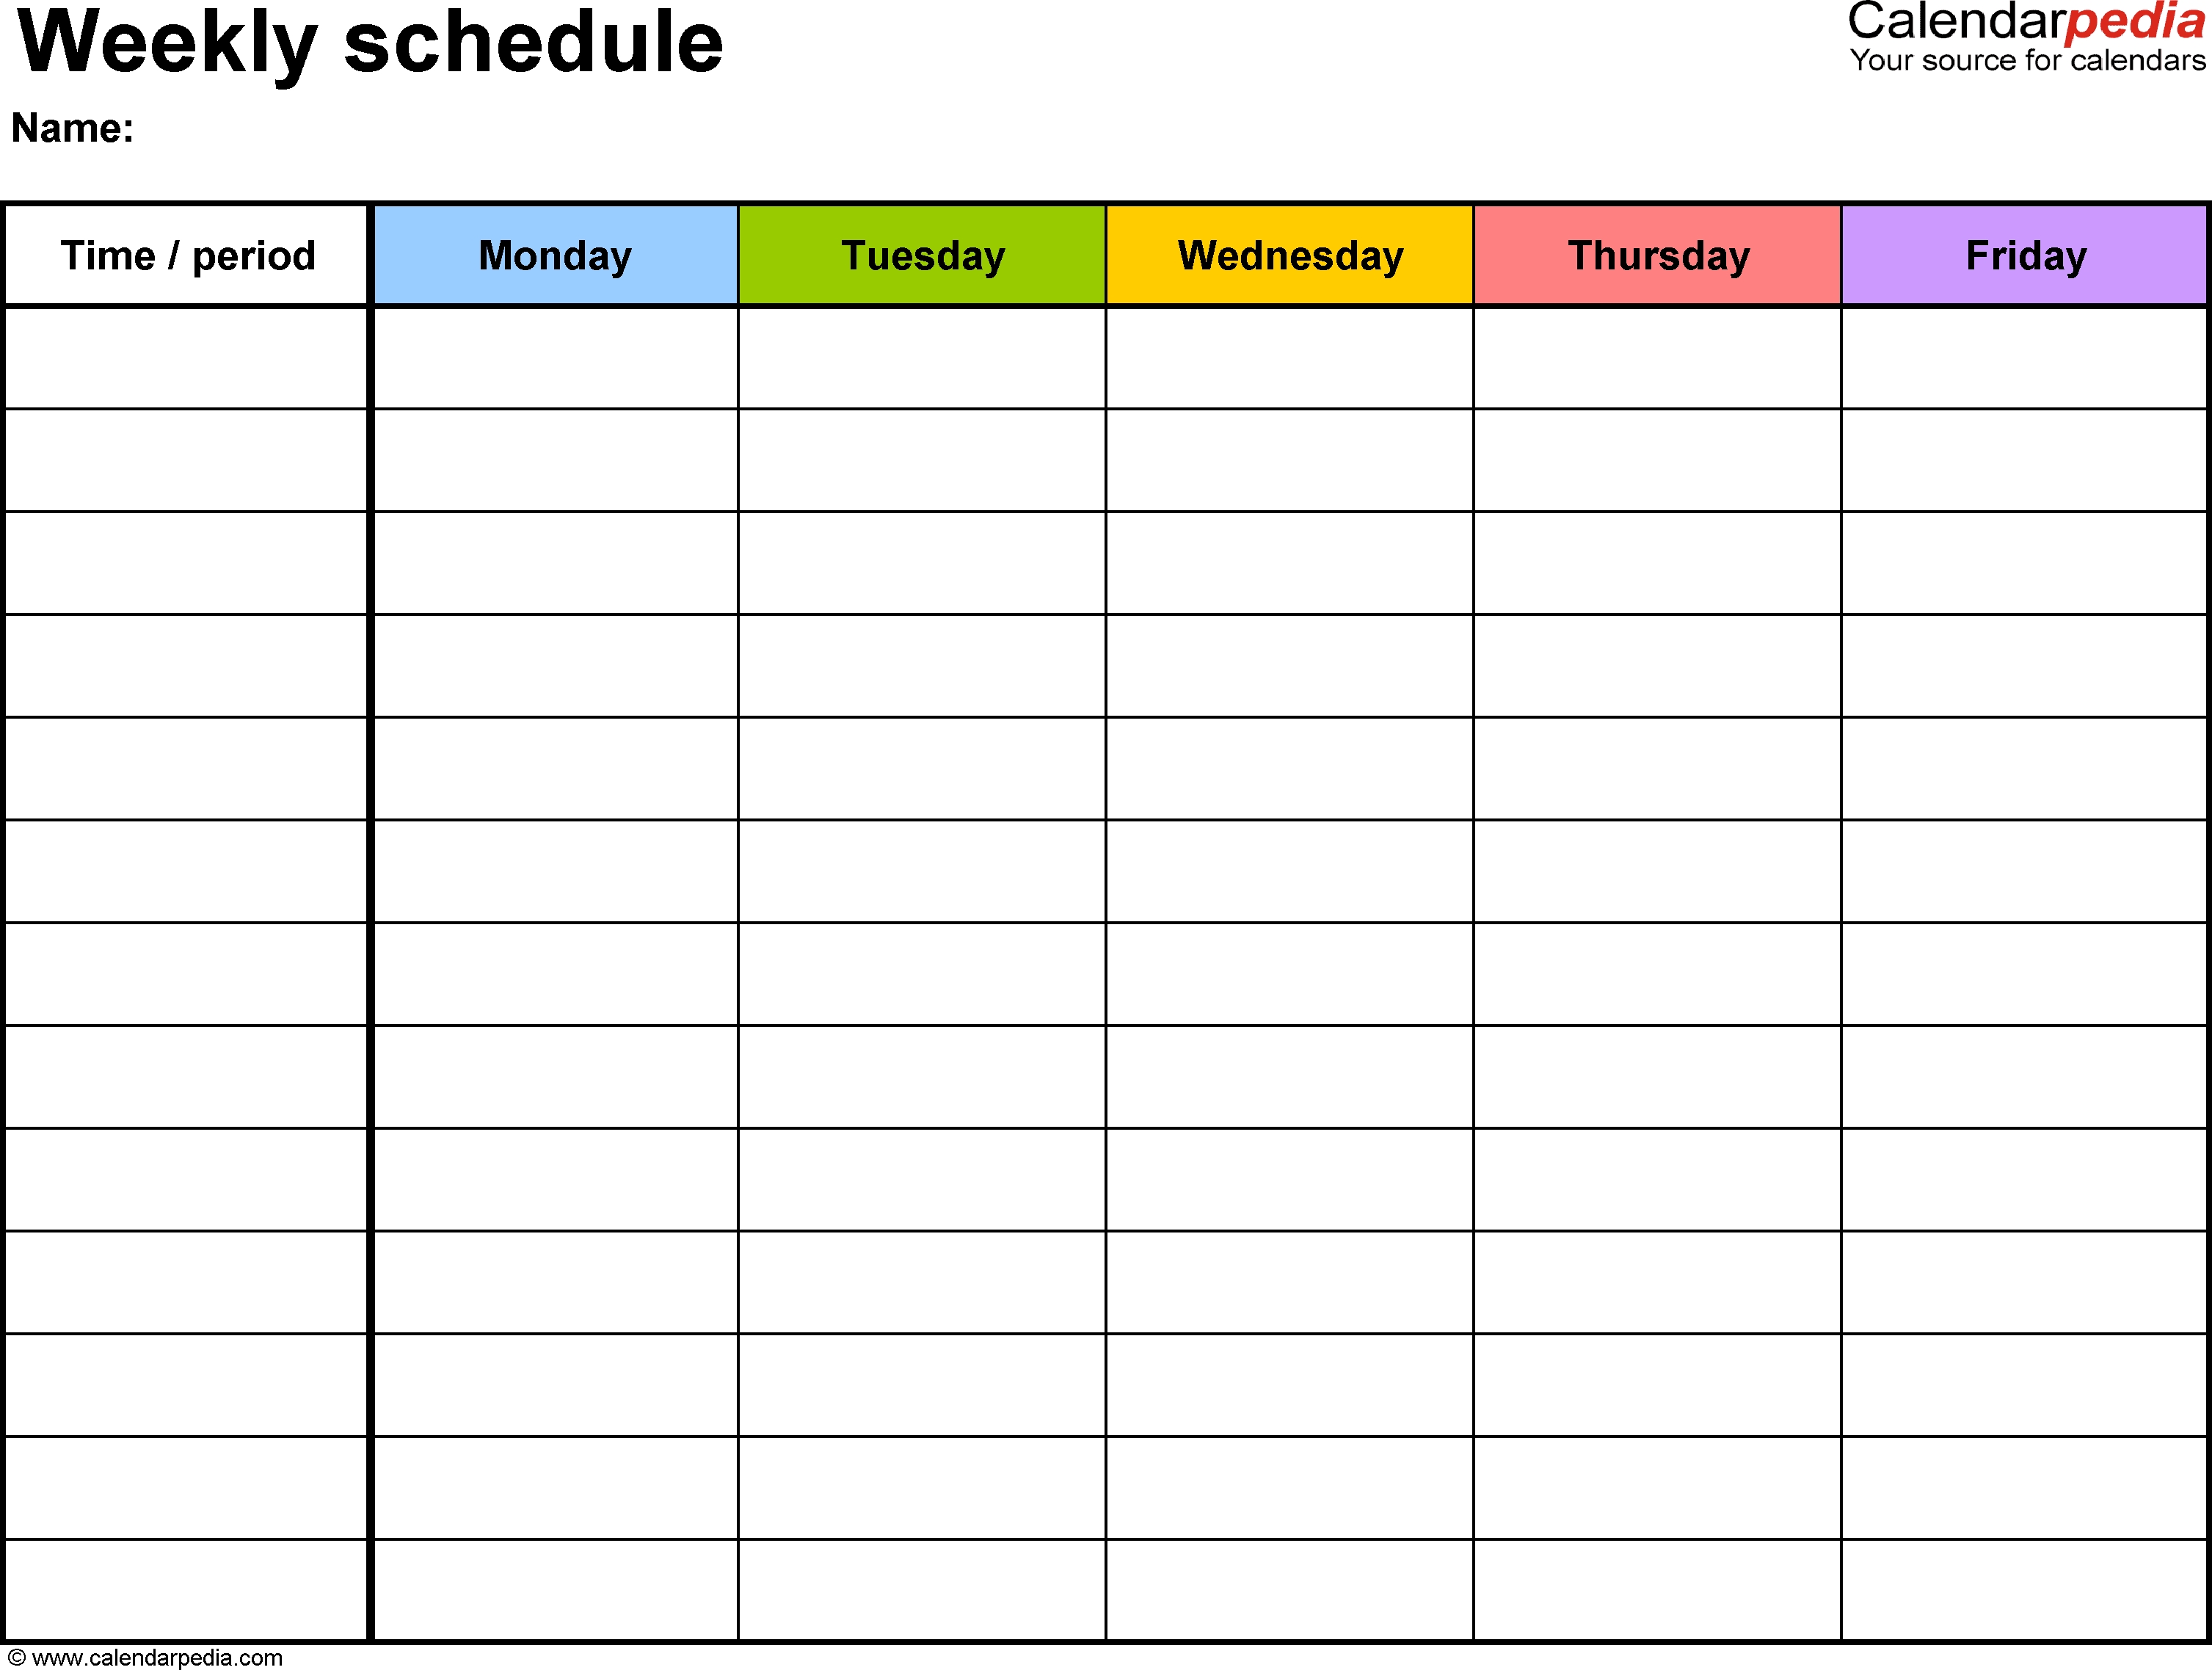 Free Weekly Schedule Templates For Excel - 18 Templates Perky Calendar Showing Monday Through Friday